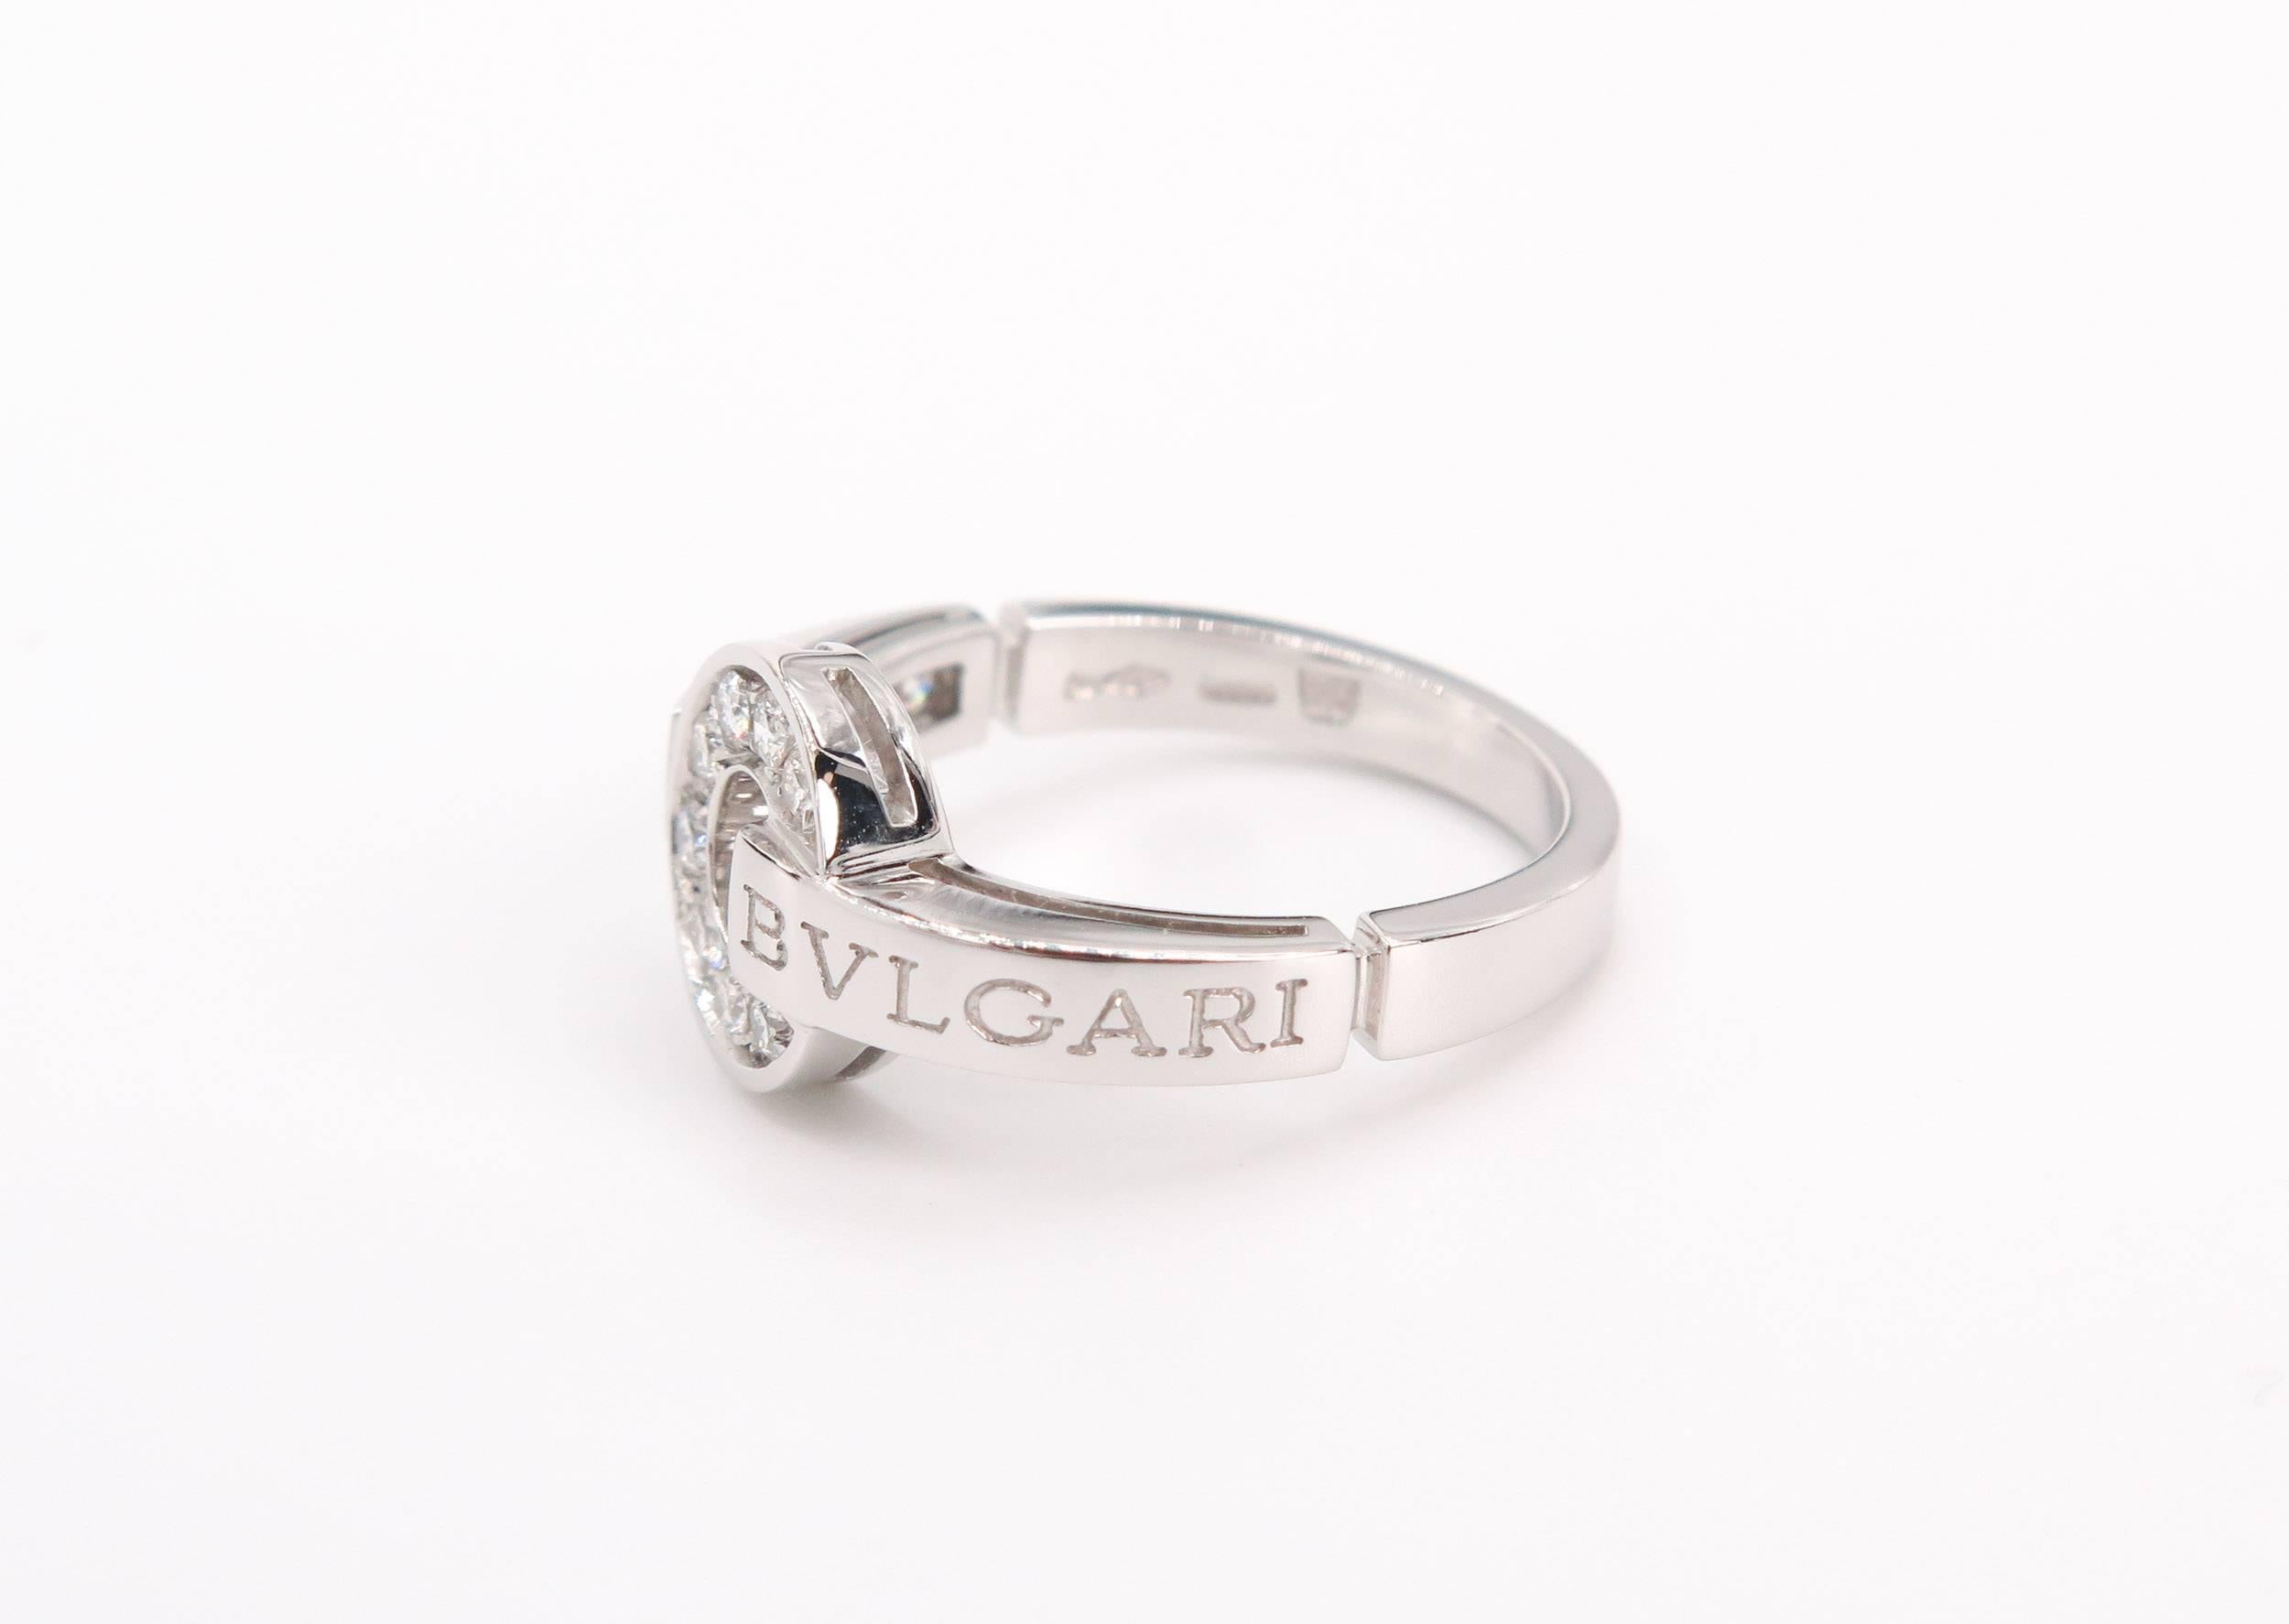 Bulgari has been synonymous with Italian designed jewelry, with inspirations drawn from the classical Roman world.
Bulgari's bold design is reflected in this contemporary signature ring inspired by the inscriptions on ancient coins, gleaming with